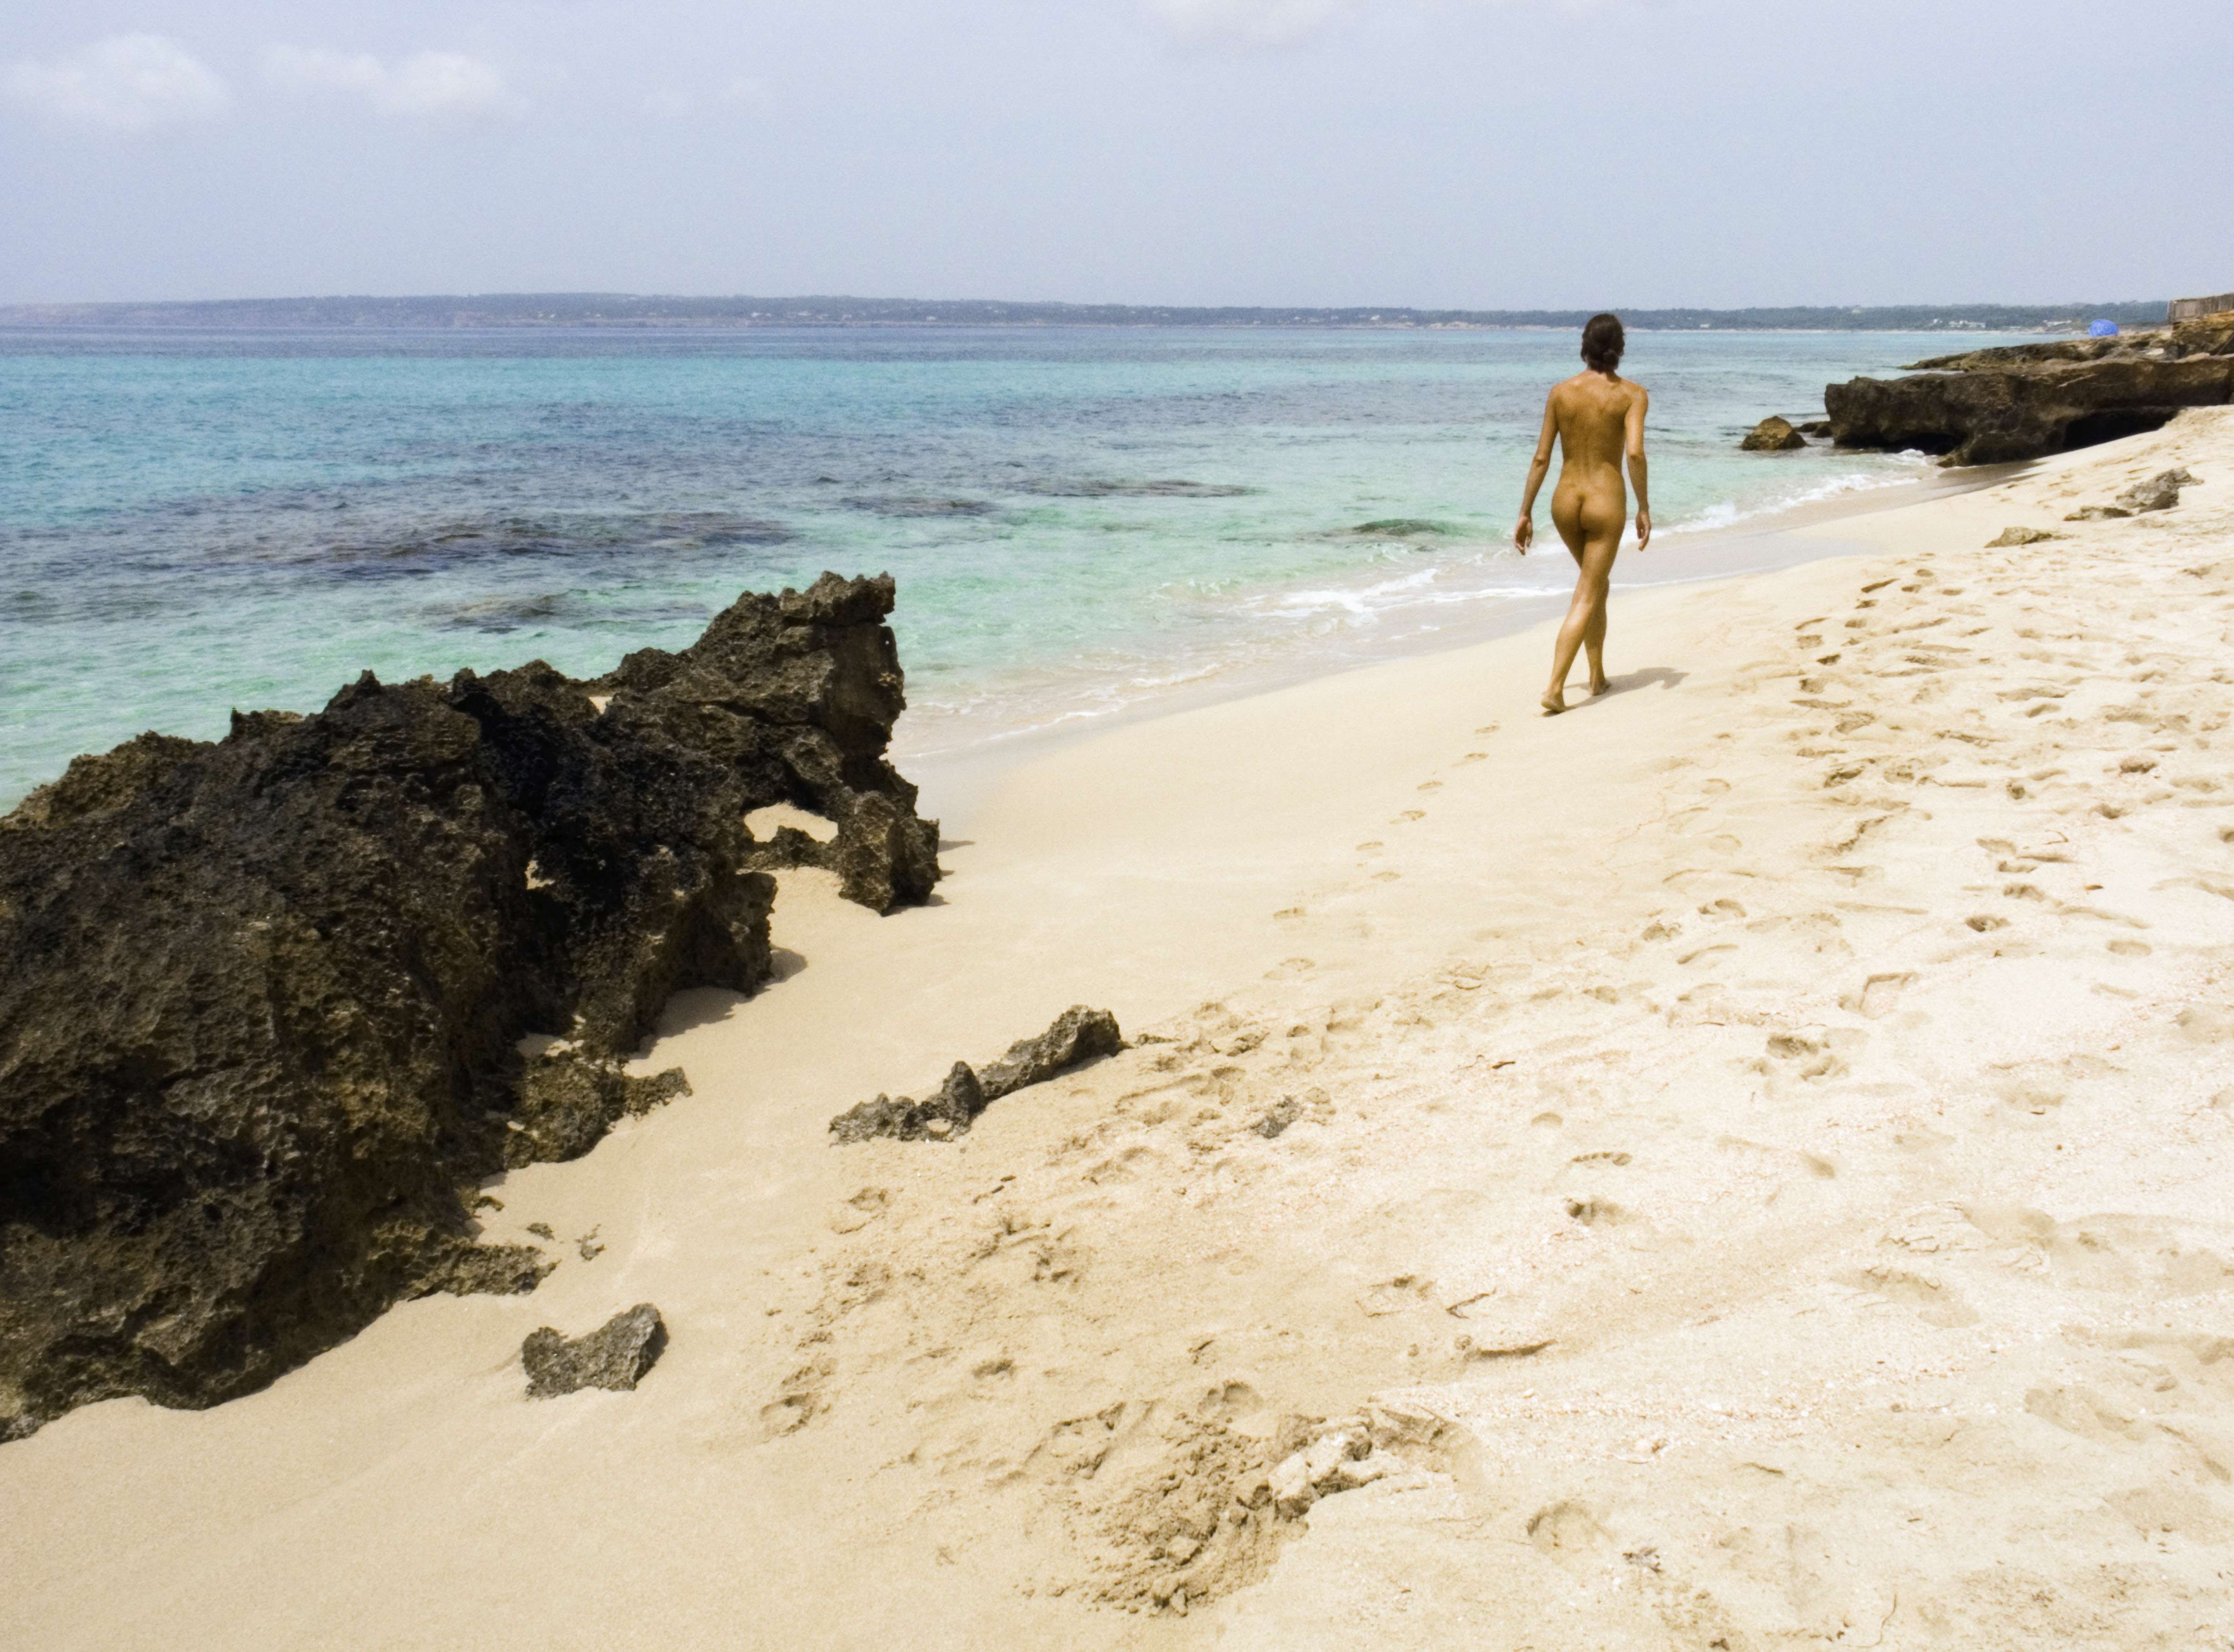 Asia for nudists: the best places to bare it all on holiday ...